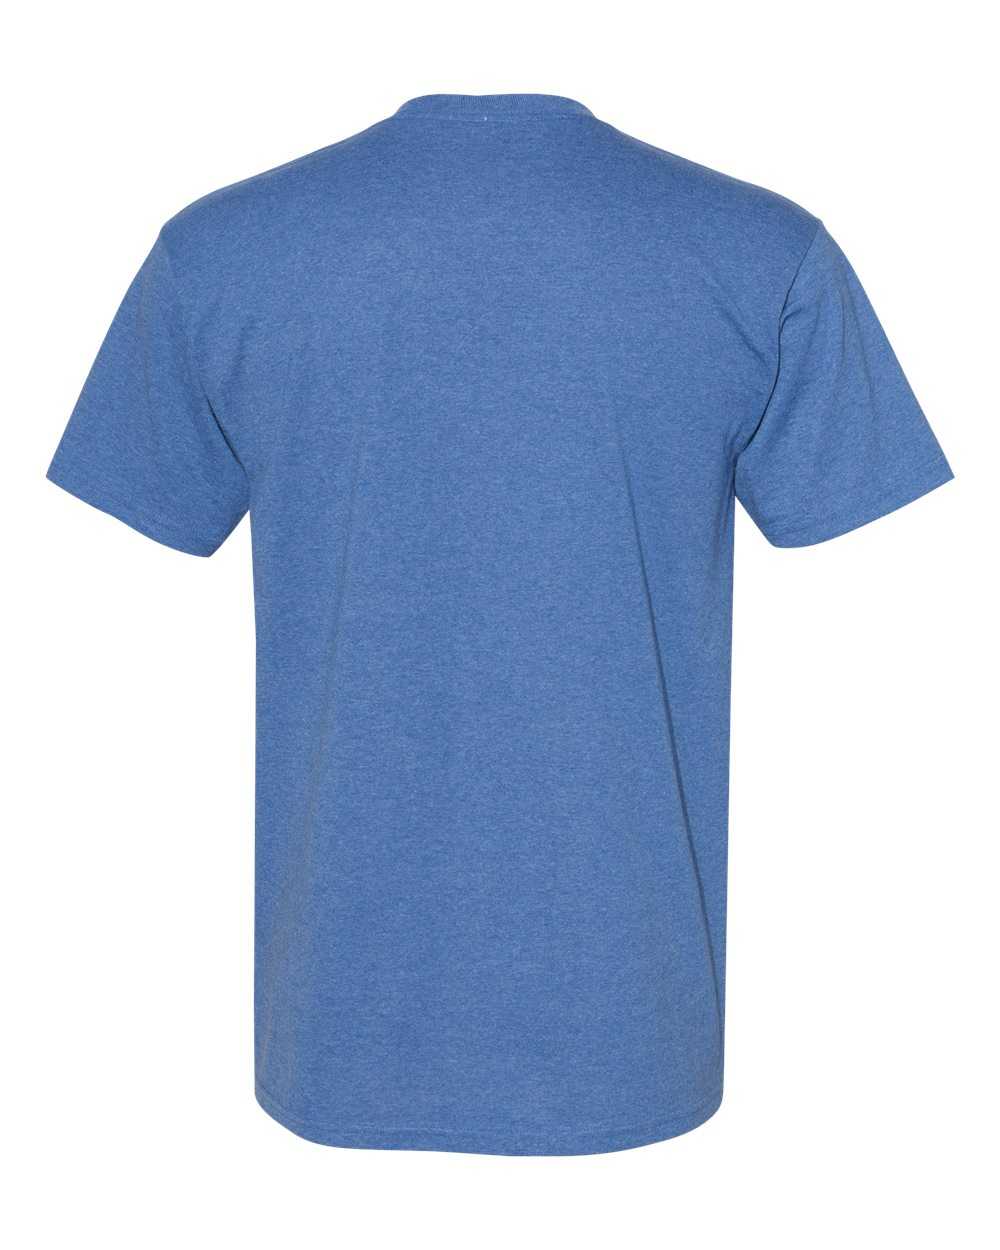 American Apparel 1701 Midweight Cotton Unisex T-Shirt - Royal Heather - HIT a Double